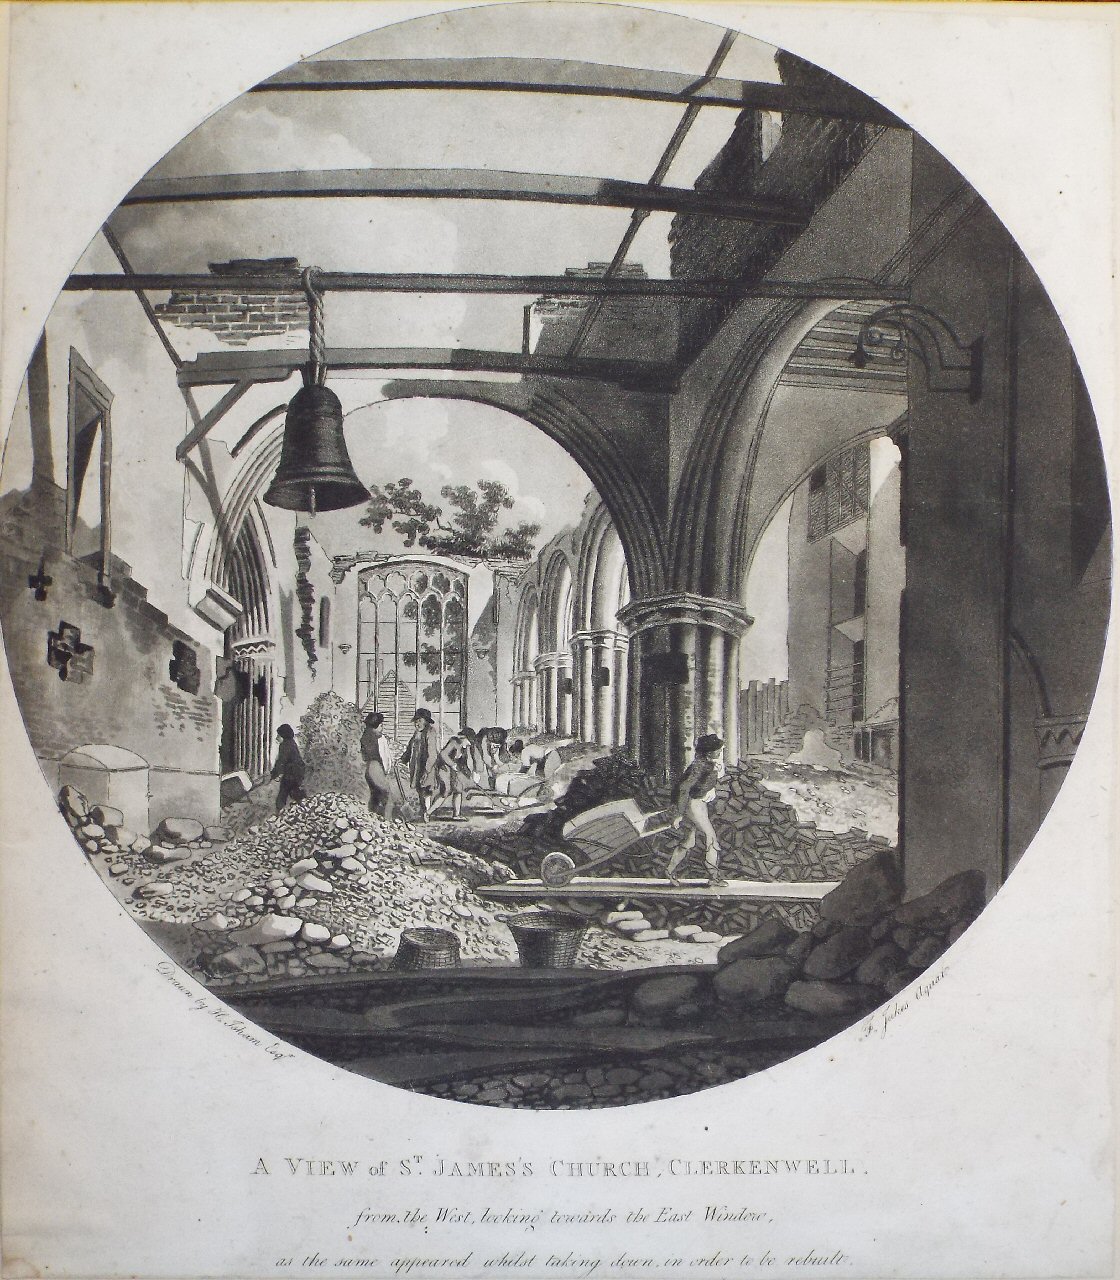 Aquatint - A View of St. James's Church, Clerkenwell. from the West, looking towards the East window, as the same appeared whilst taking down, in order to be rebuilt.  - Jukes